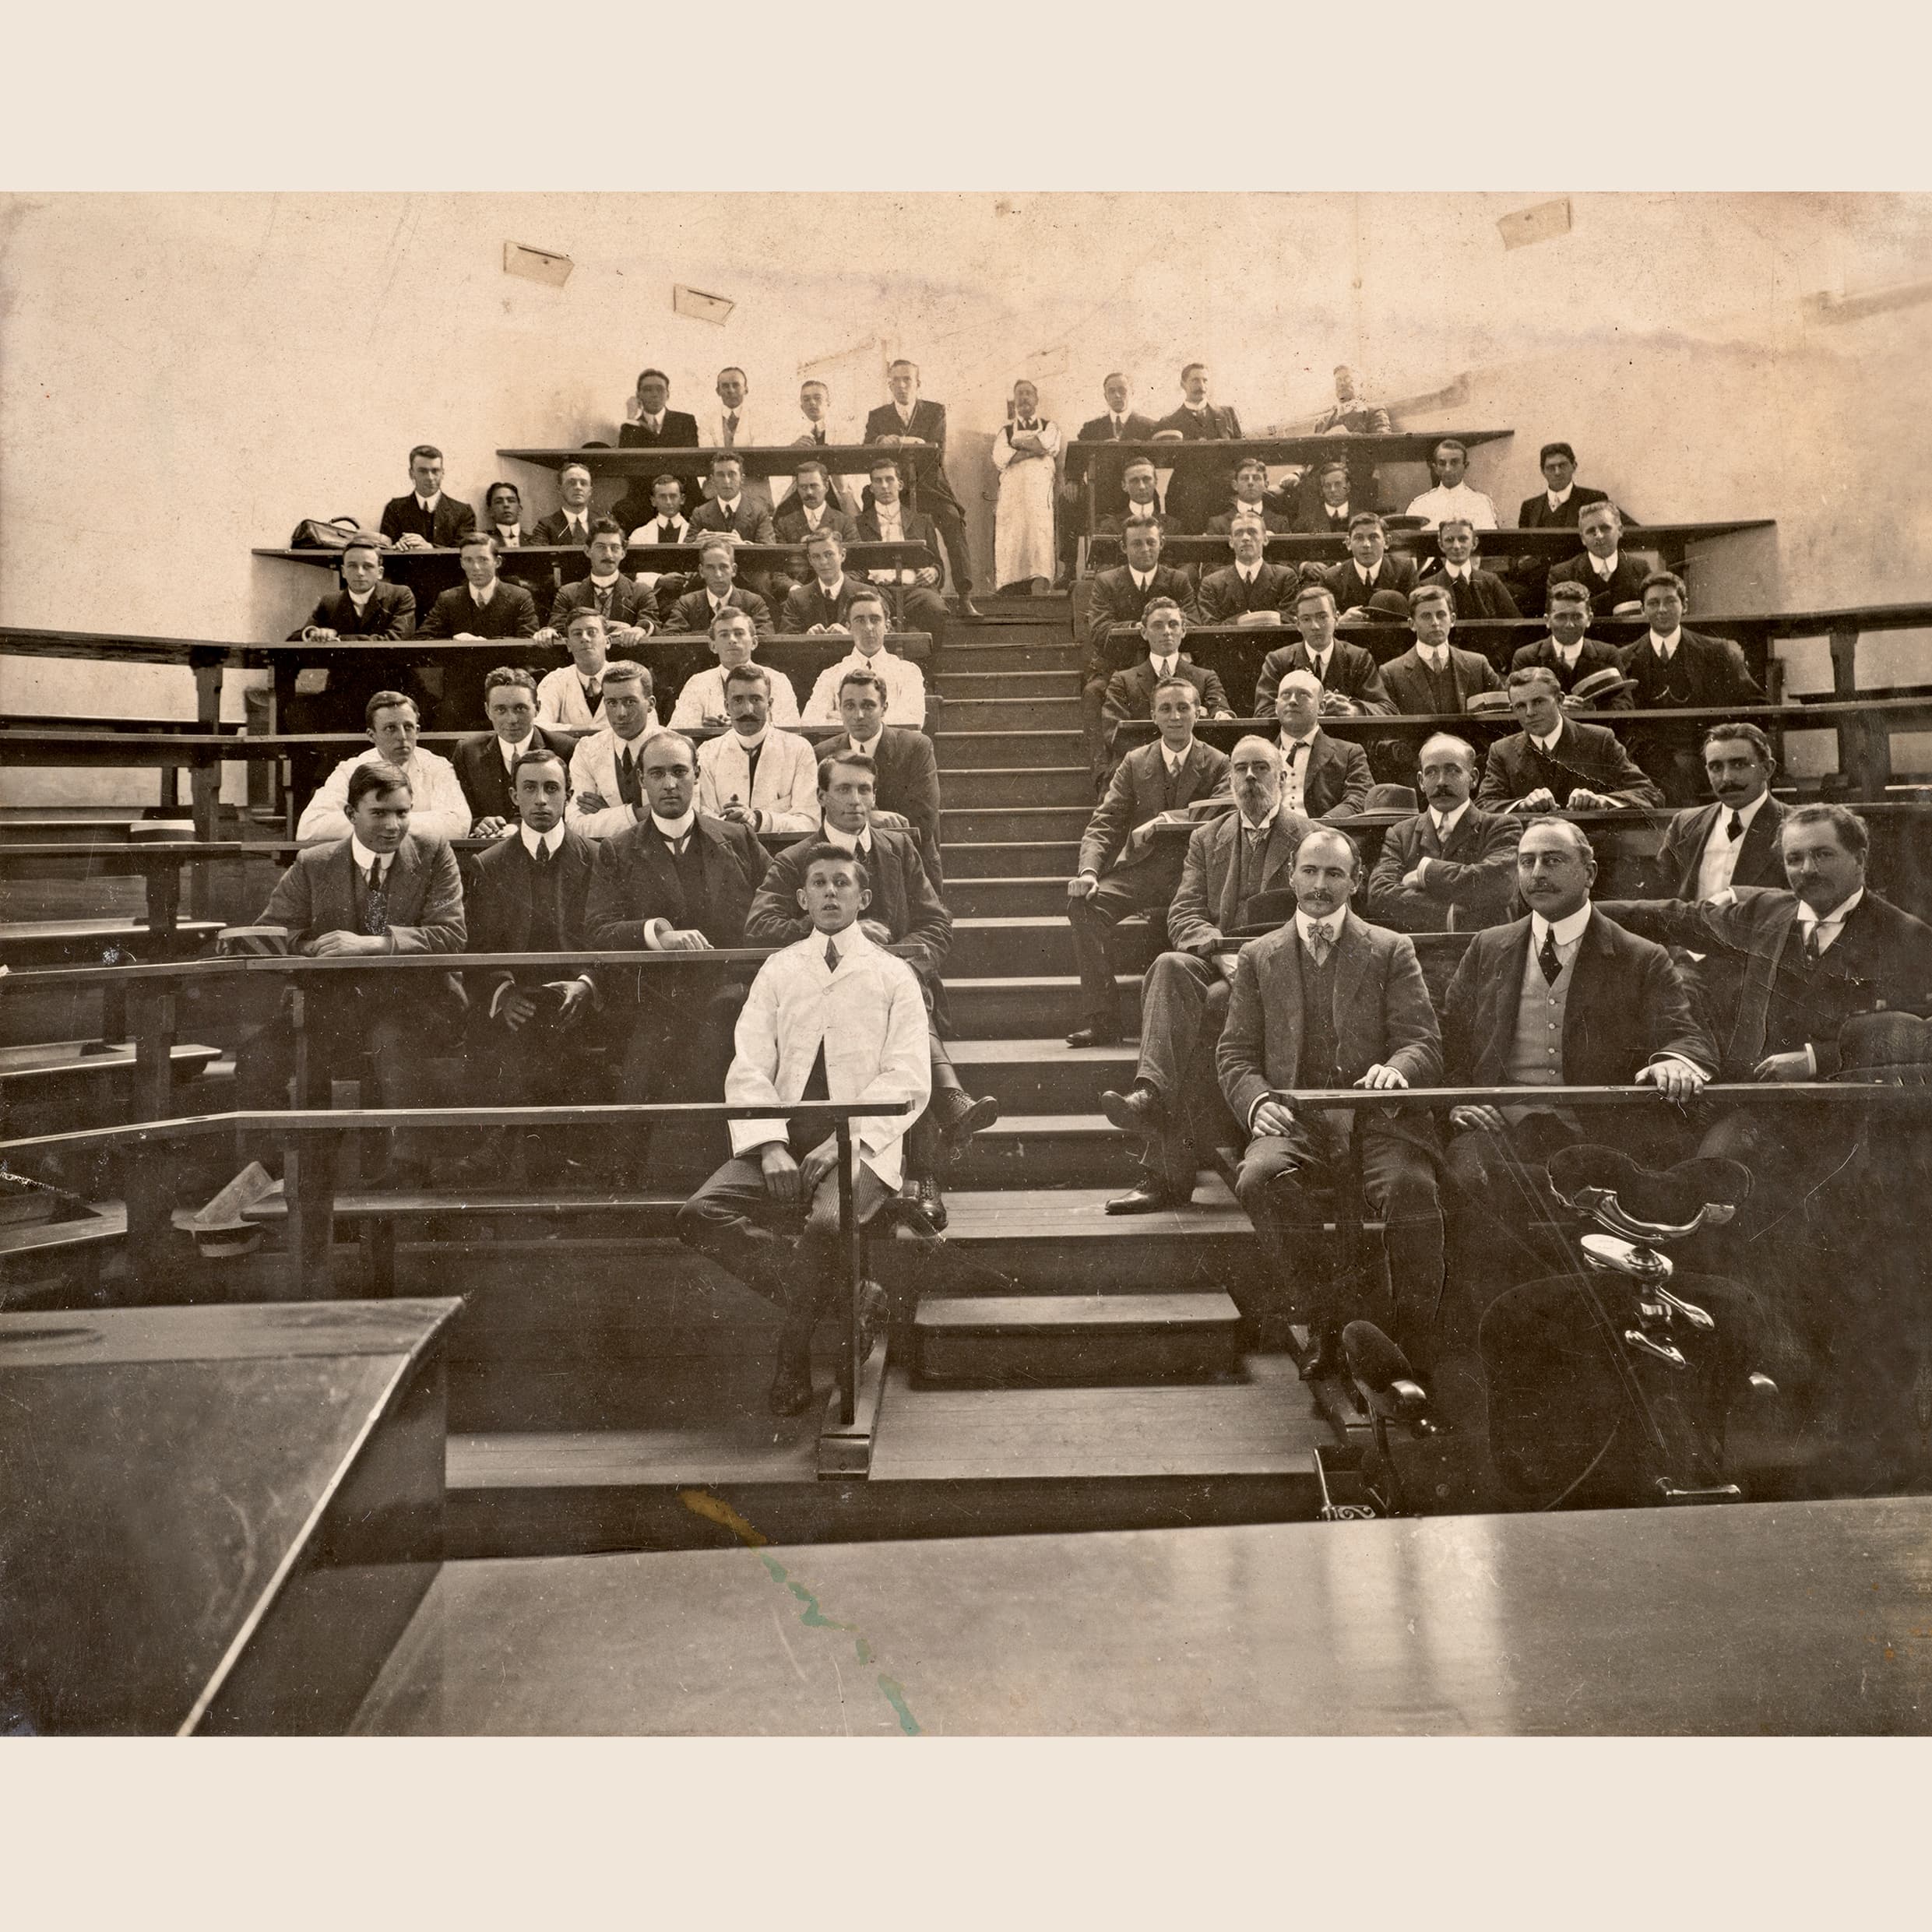 Staff, honoraries and students, lecture theatre, Australian College of Dentistry, Spring Street, </strong>1907–08, photograph, 20.5 × 28.0 cm. HFADM 1232.369.a, Henry Forman Atkinson Dental Museum, University of Melbourne.